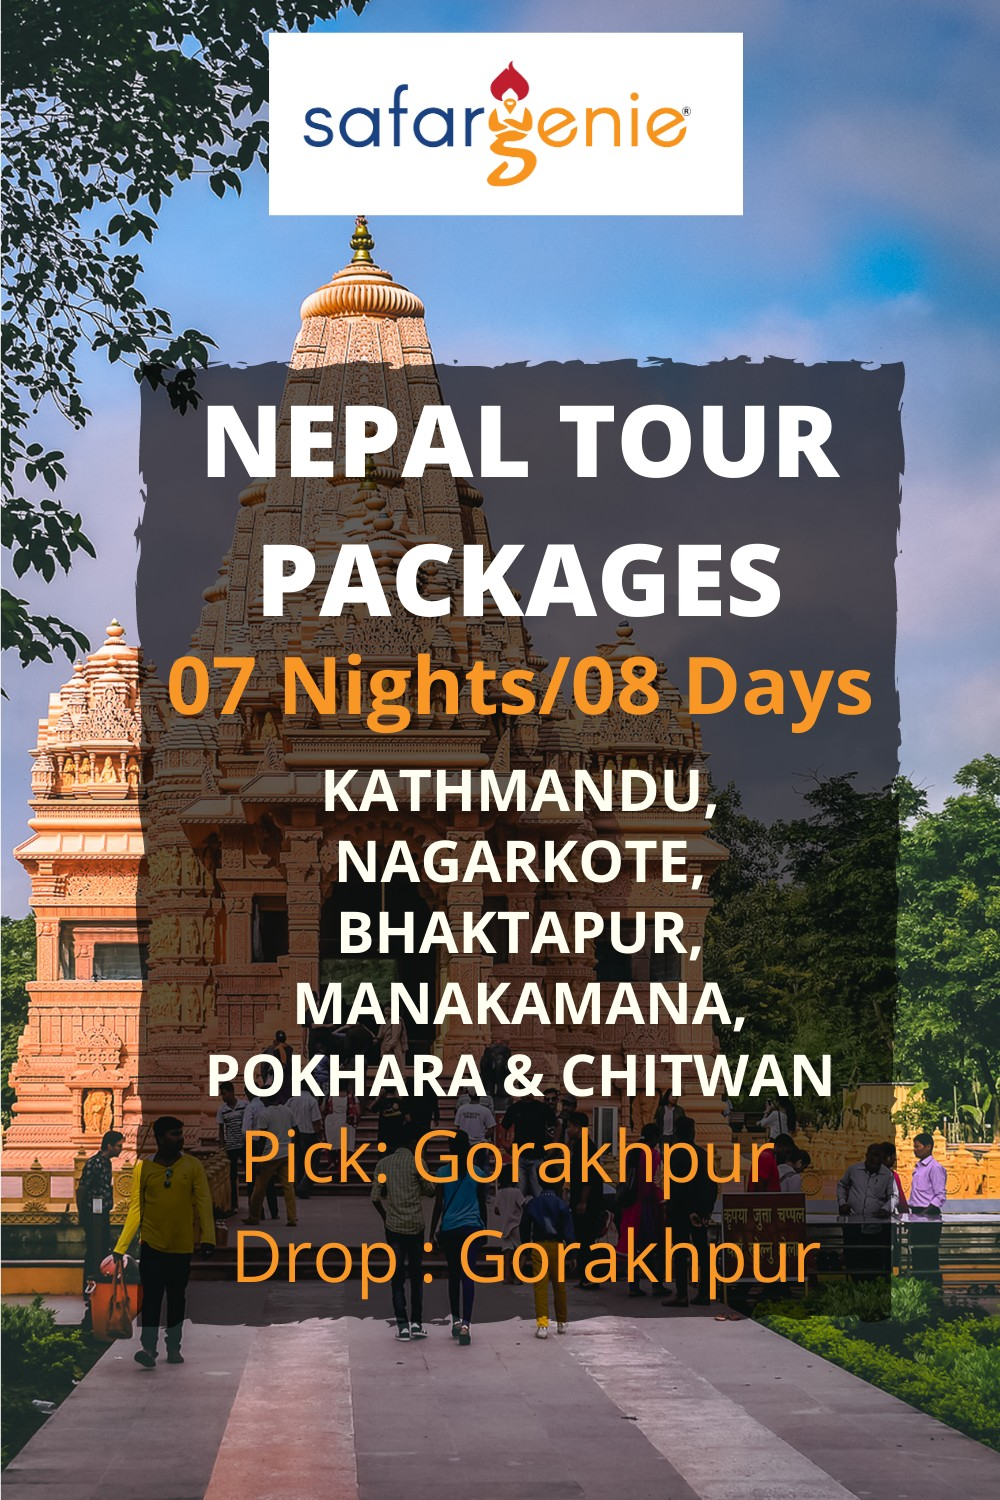 What is a good family package tour of Nepal